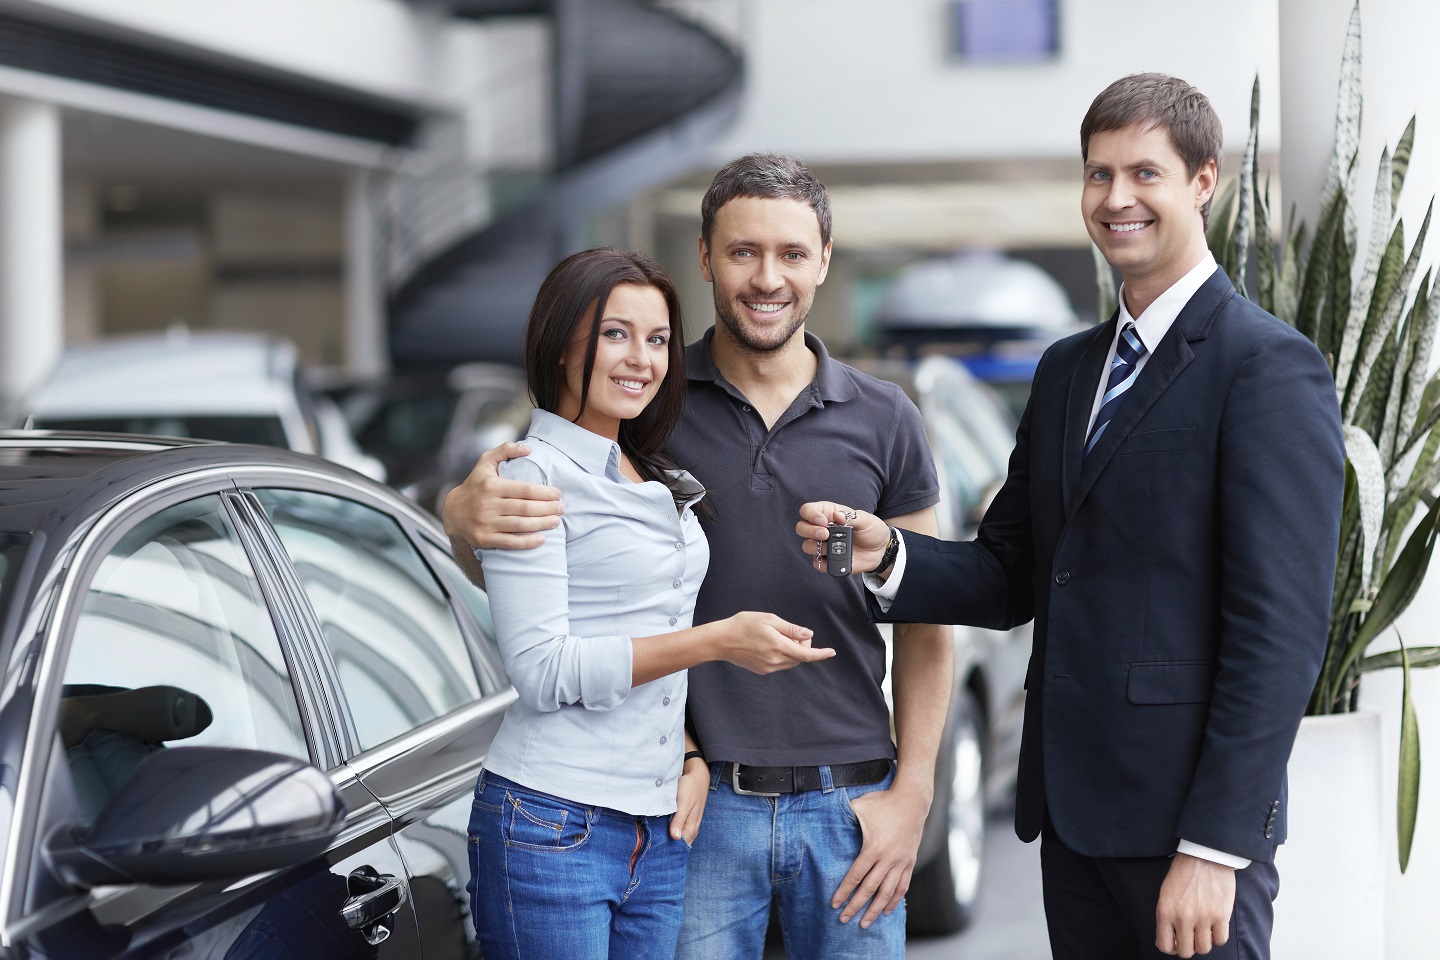 Find Your Next Car Here!